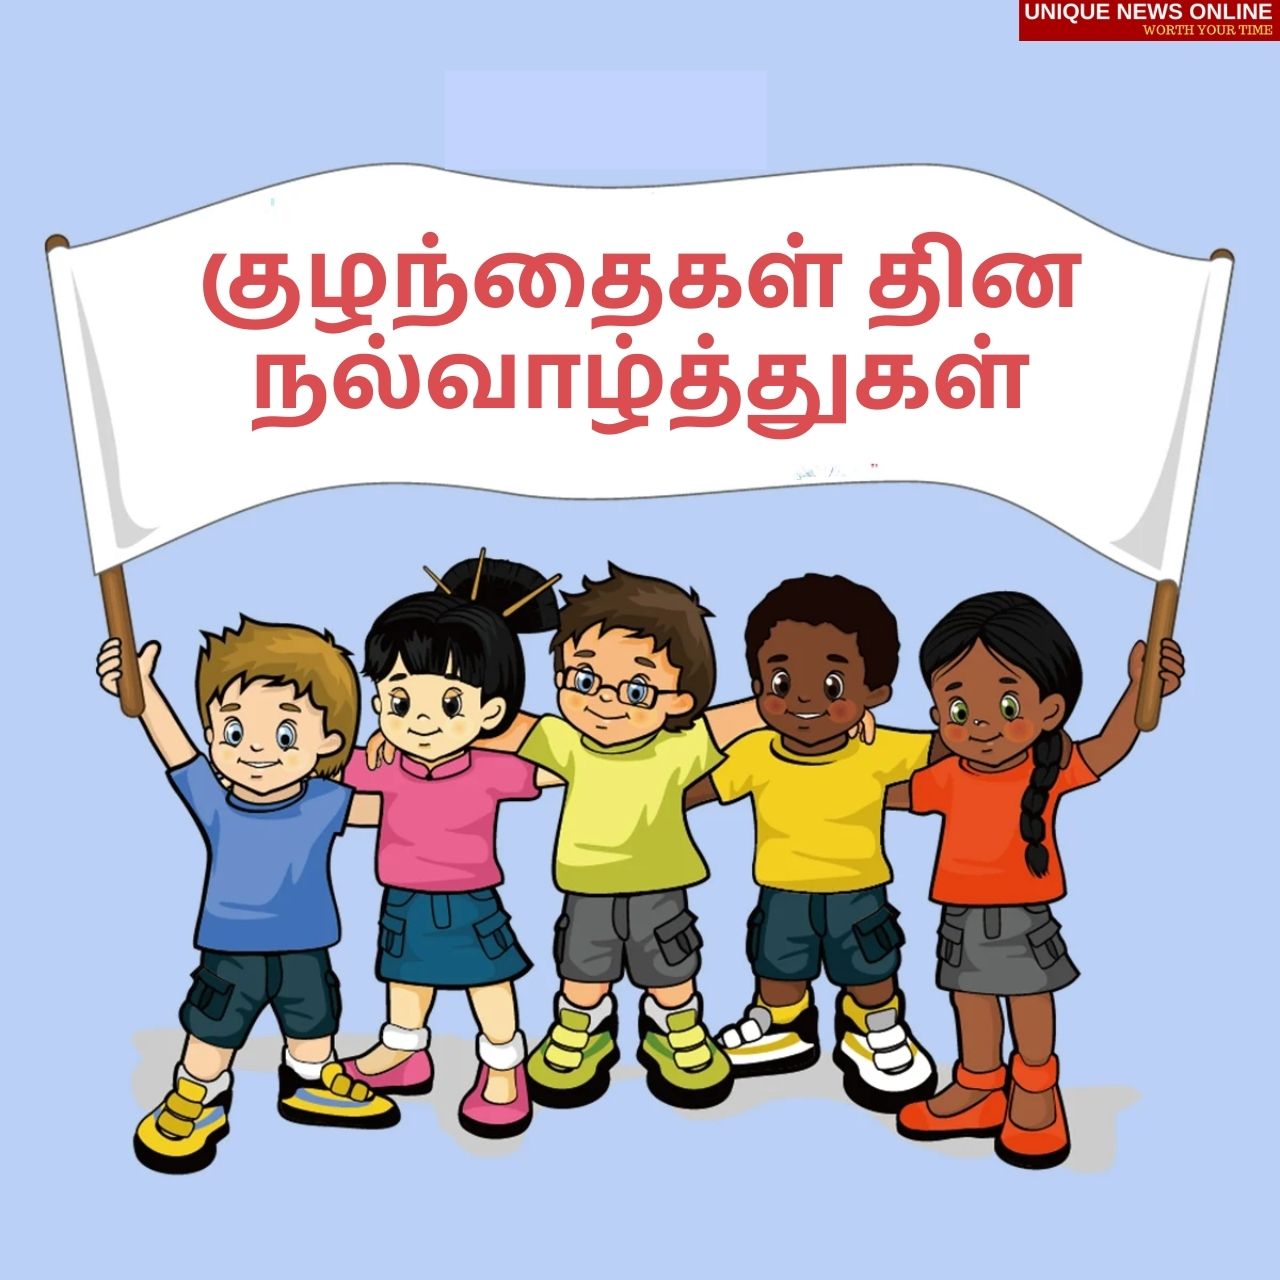 Happy Children's Day 2021 Tamil and Malayalam Wishes, Quotes, Greetings, Messages, and Status to Share